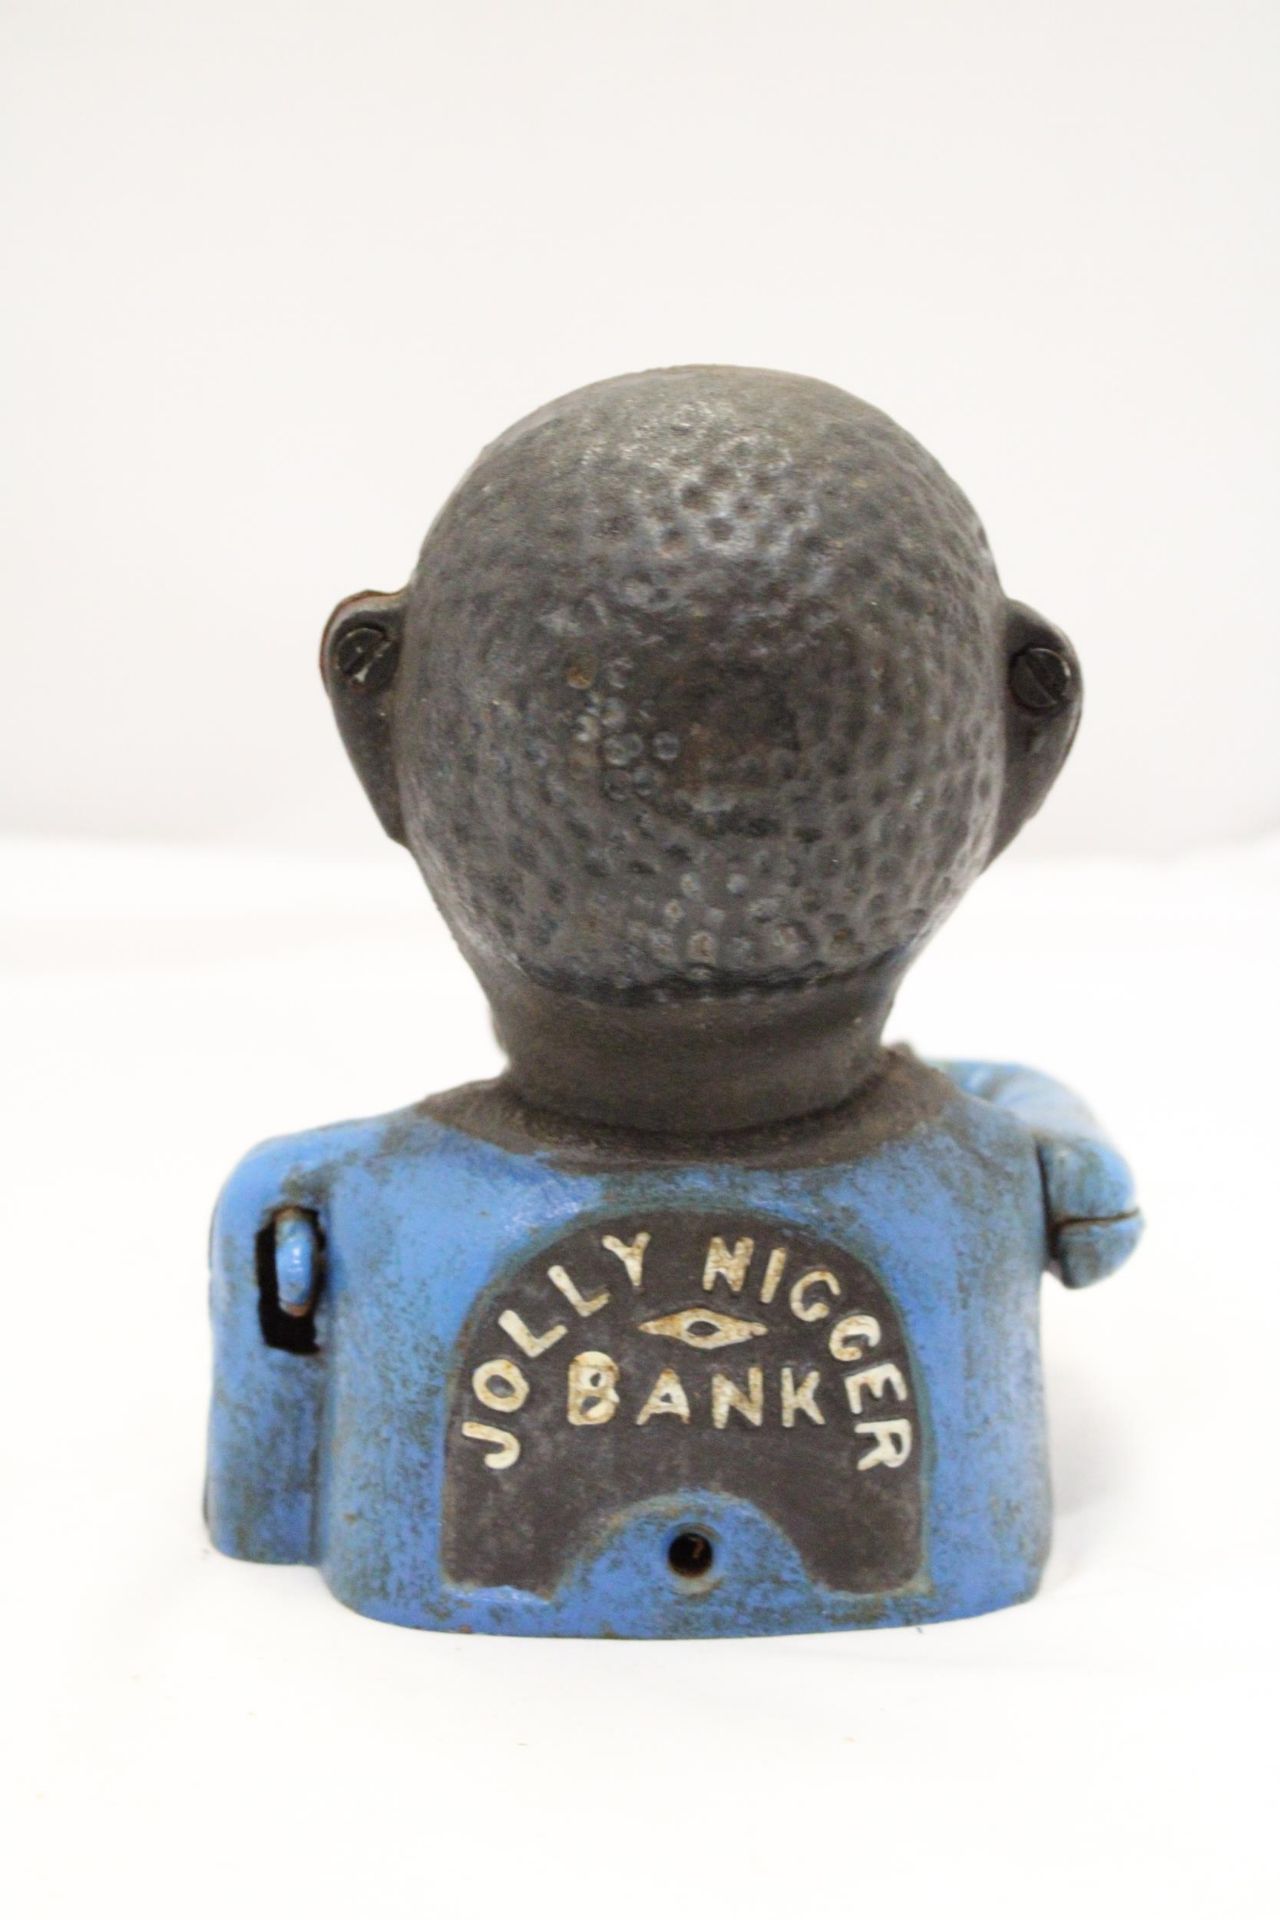 A VINTAGE CAST IRON AFRICAN AMERICAN MECHANICAL BANK - Image 4 of 6